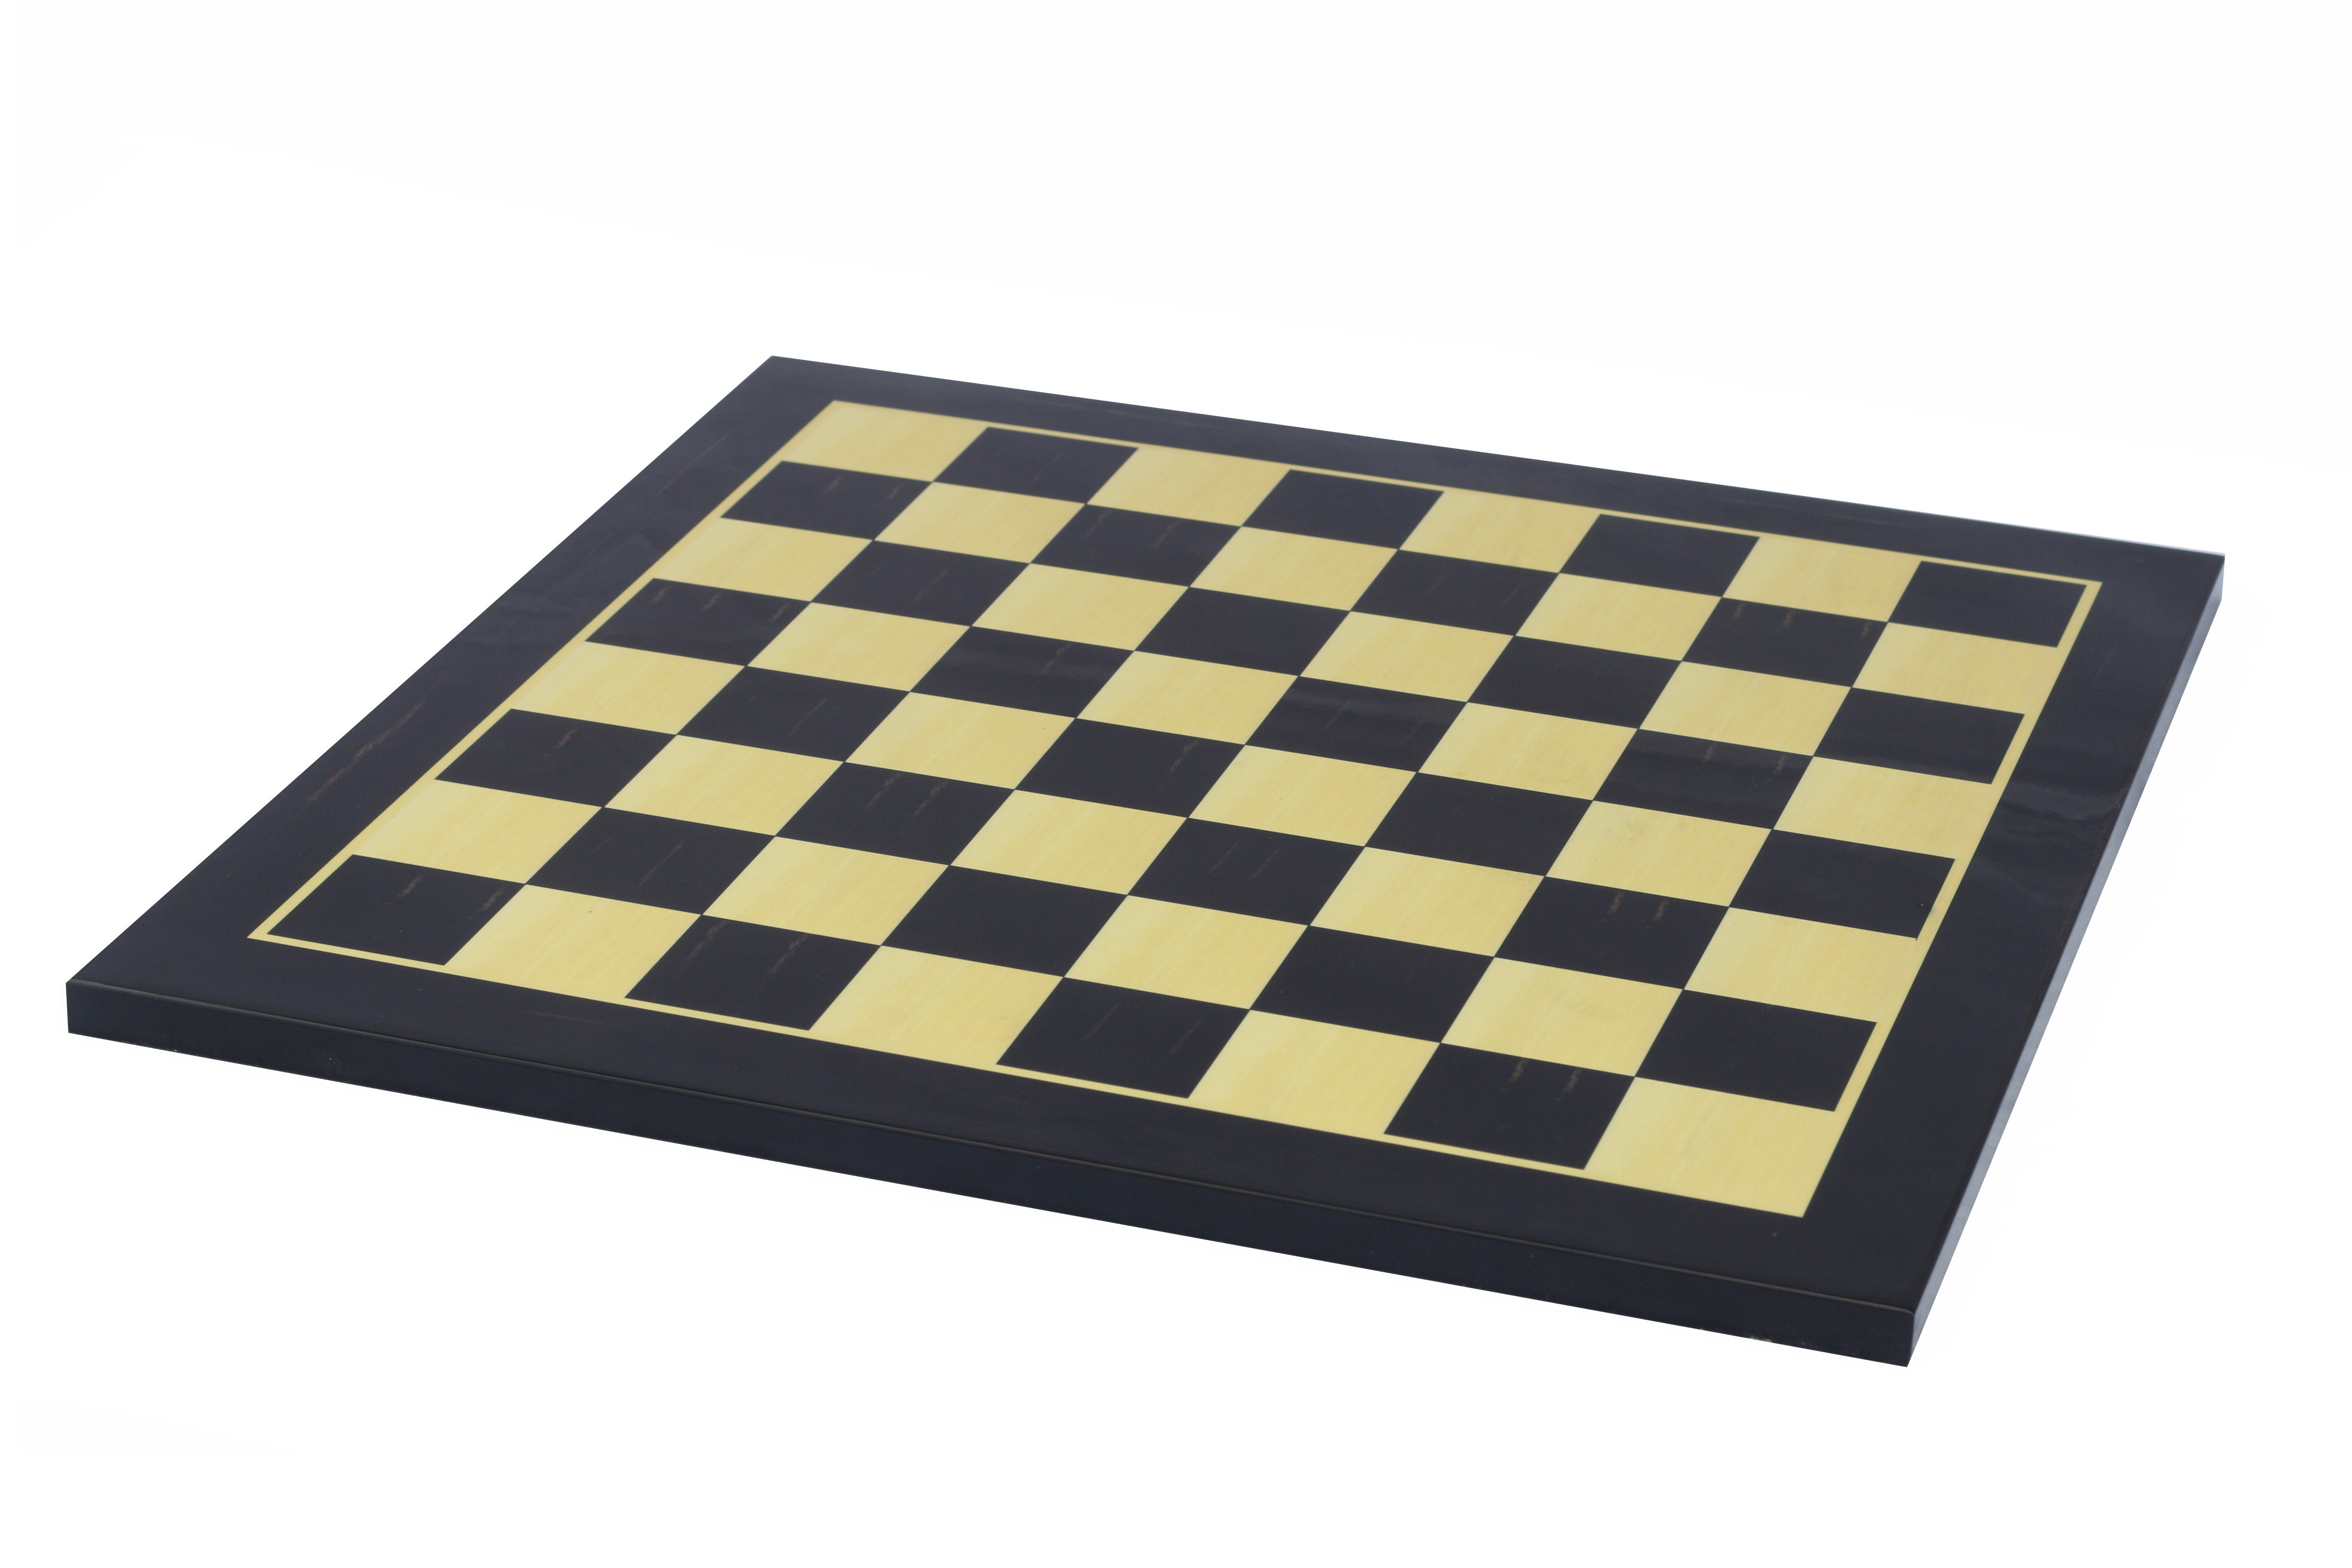 Chess Board with 2.5" Square size in Ebony/Box wood Look